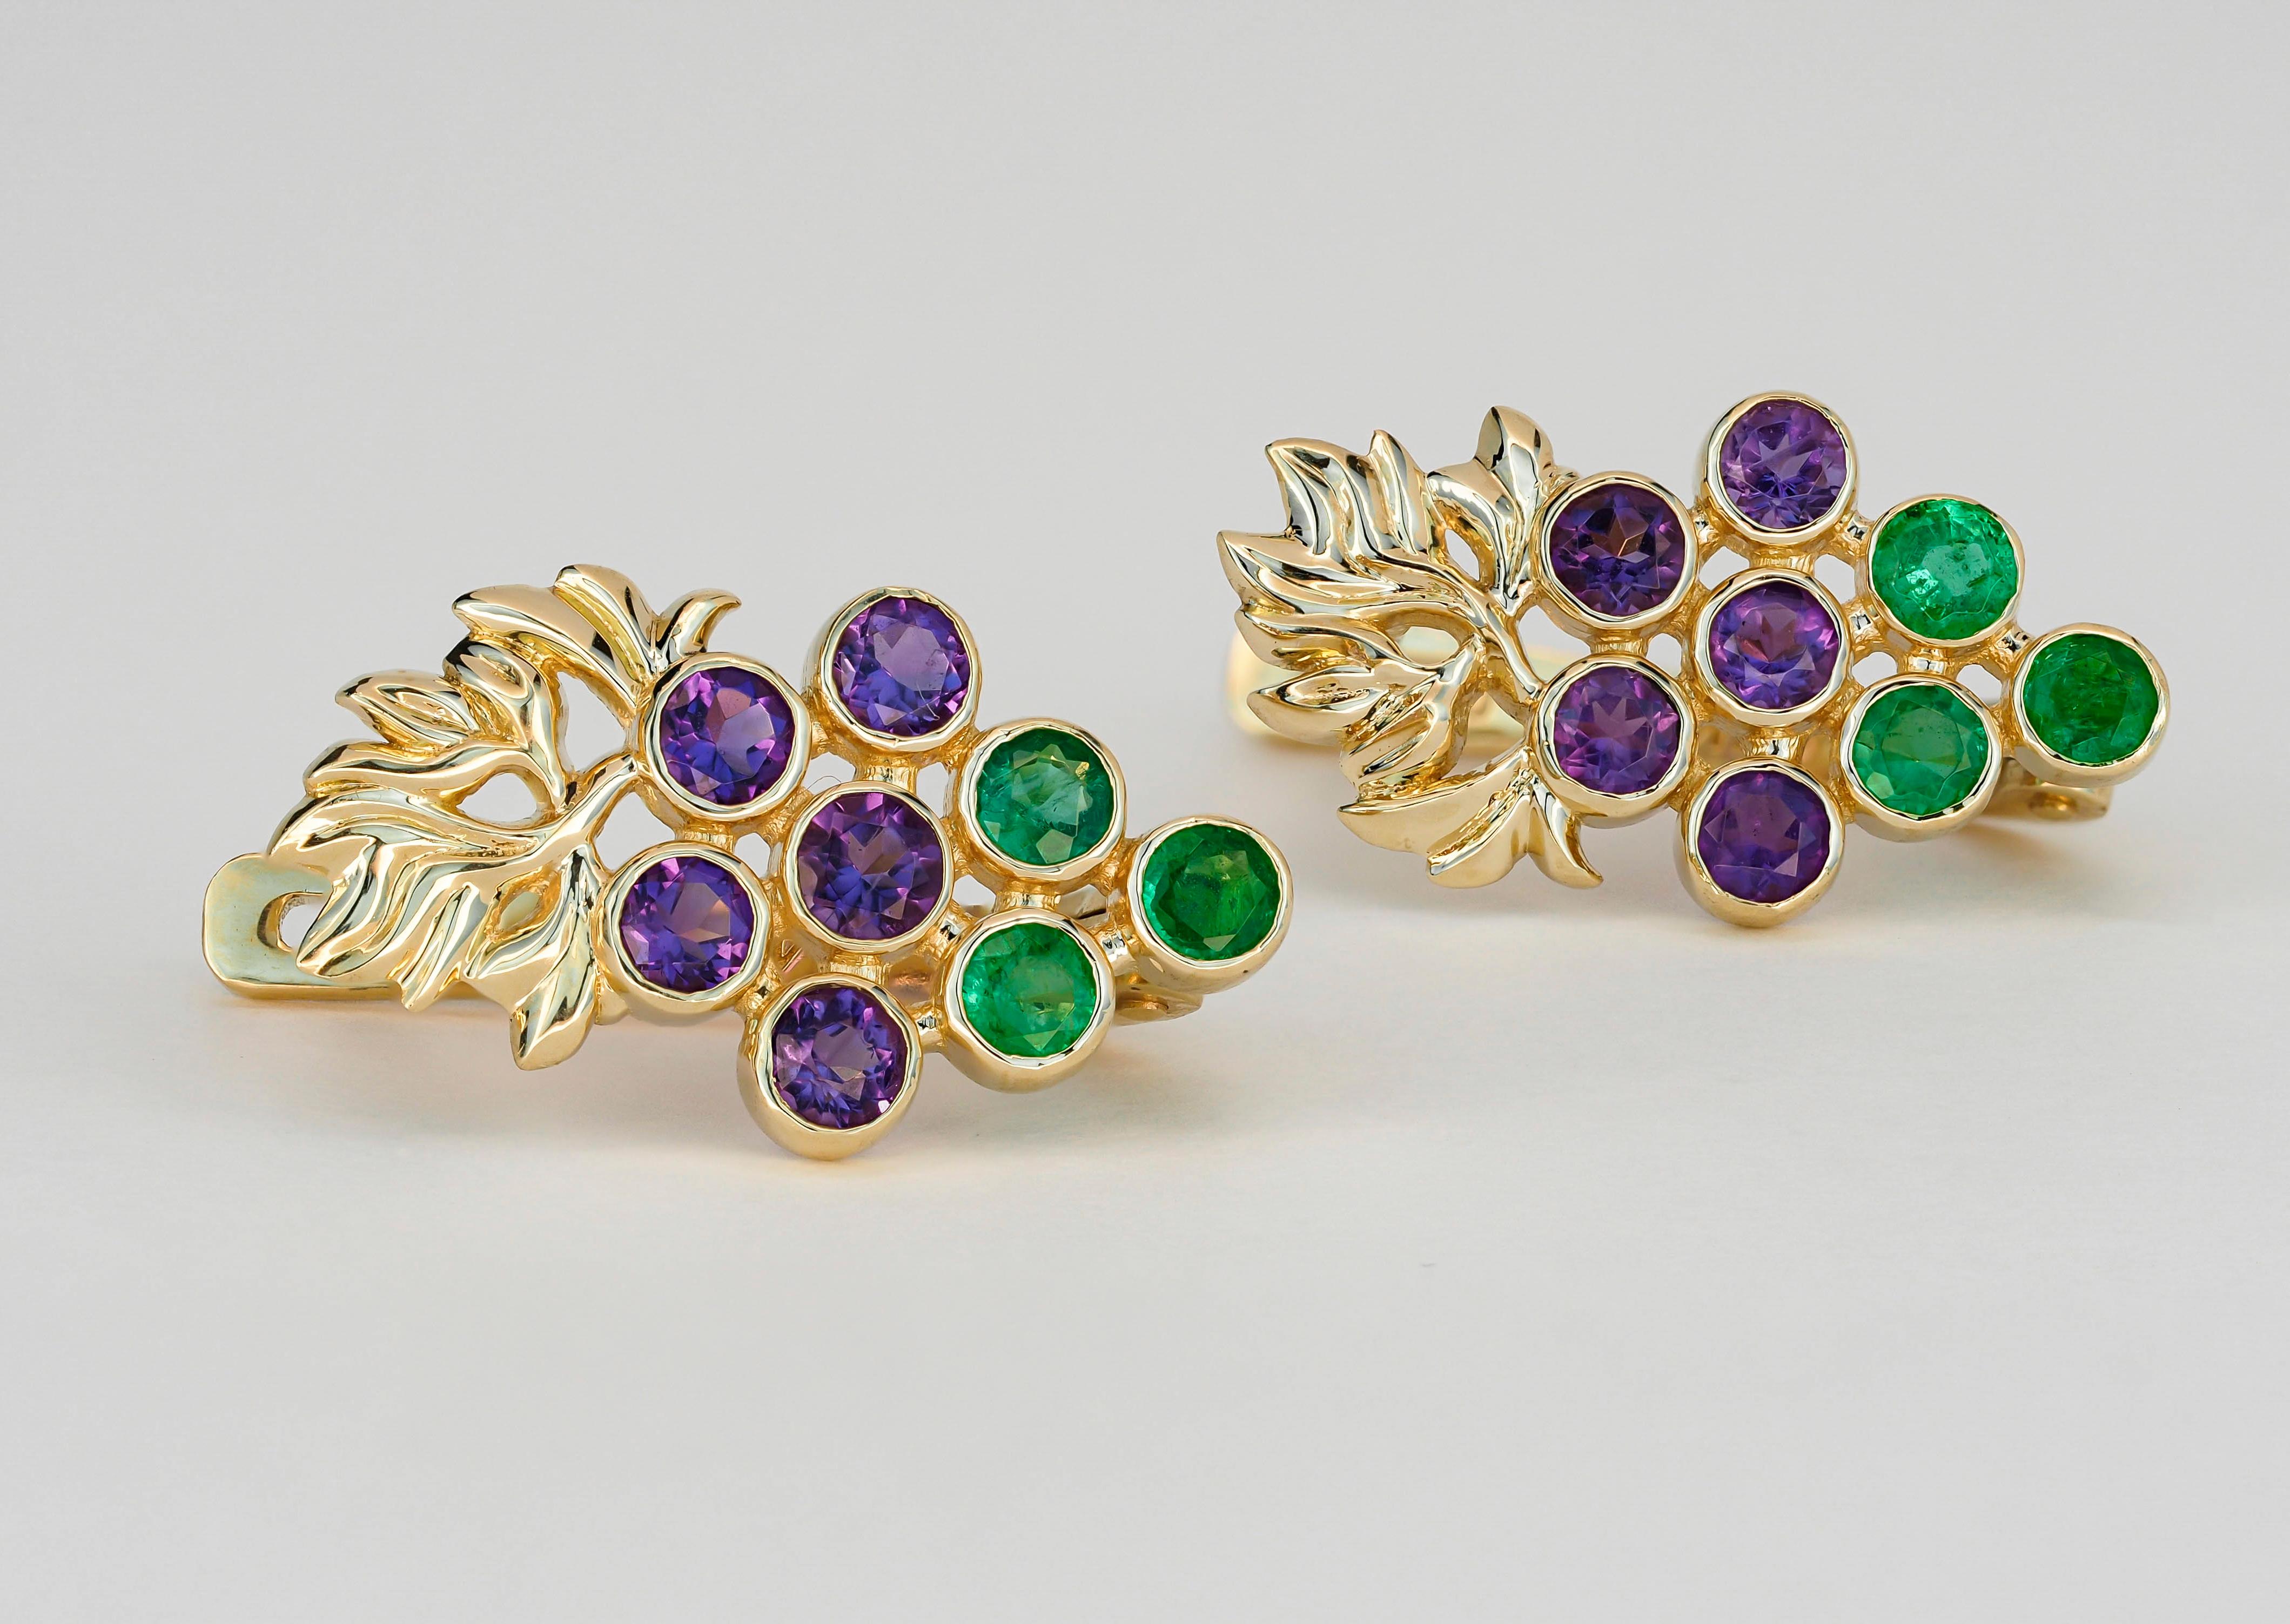 14 kt solid gold earrings with natural emeralds and amethysts. Grape design earrings. May birthstone. February birthstone earrings.
Weight: 3.1 g. 
Size:17.5 x 10 mm.
14k gold
Gemstones:
Natural emeralds: 6 pieces, color - green
Round cut, weight -